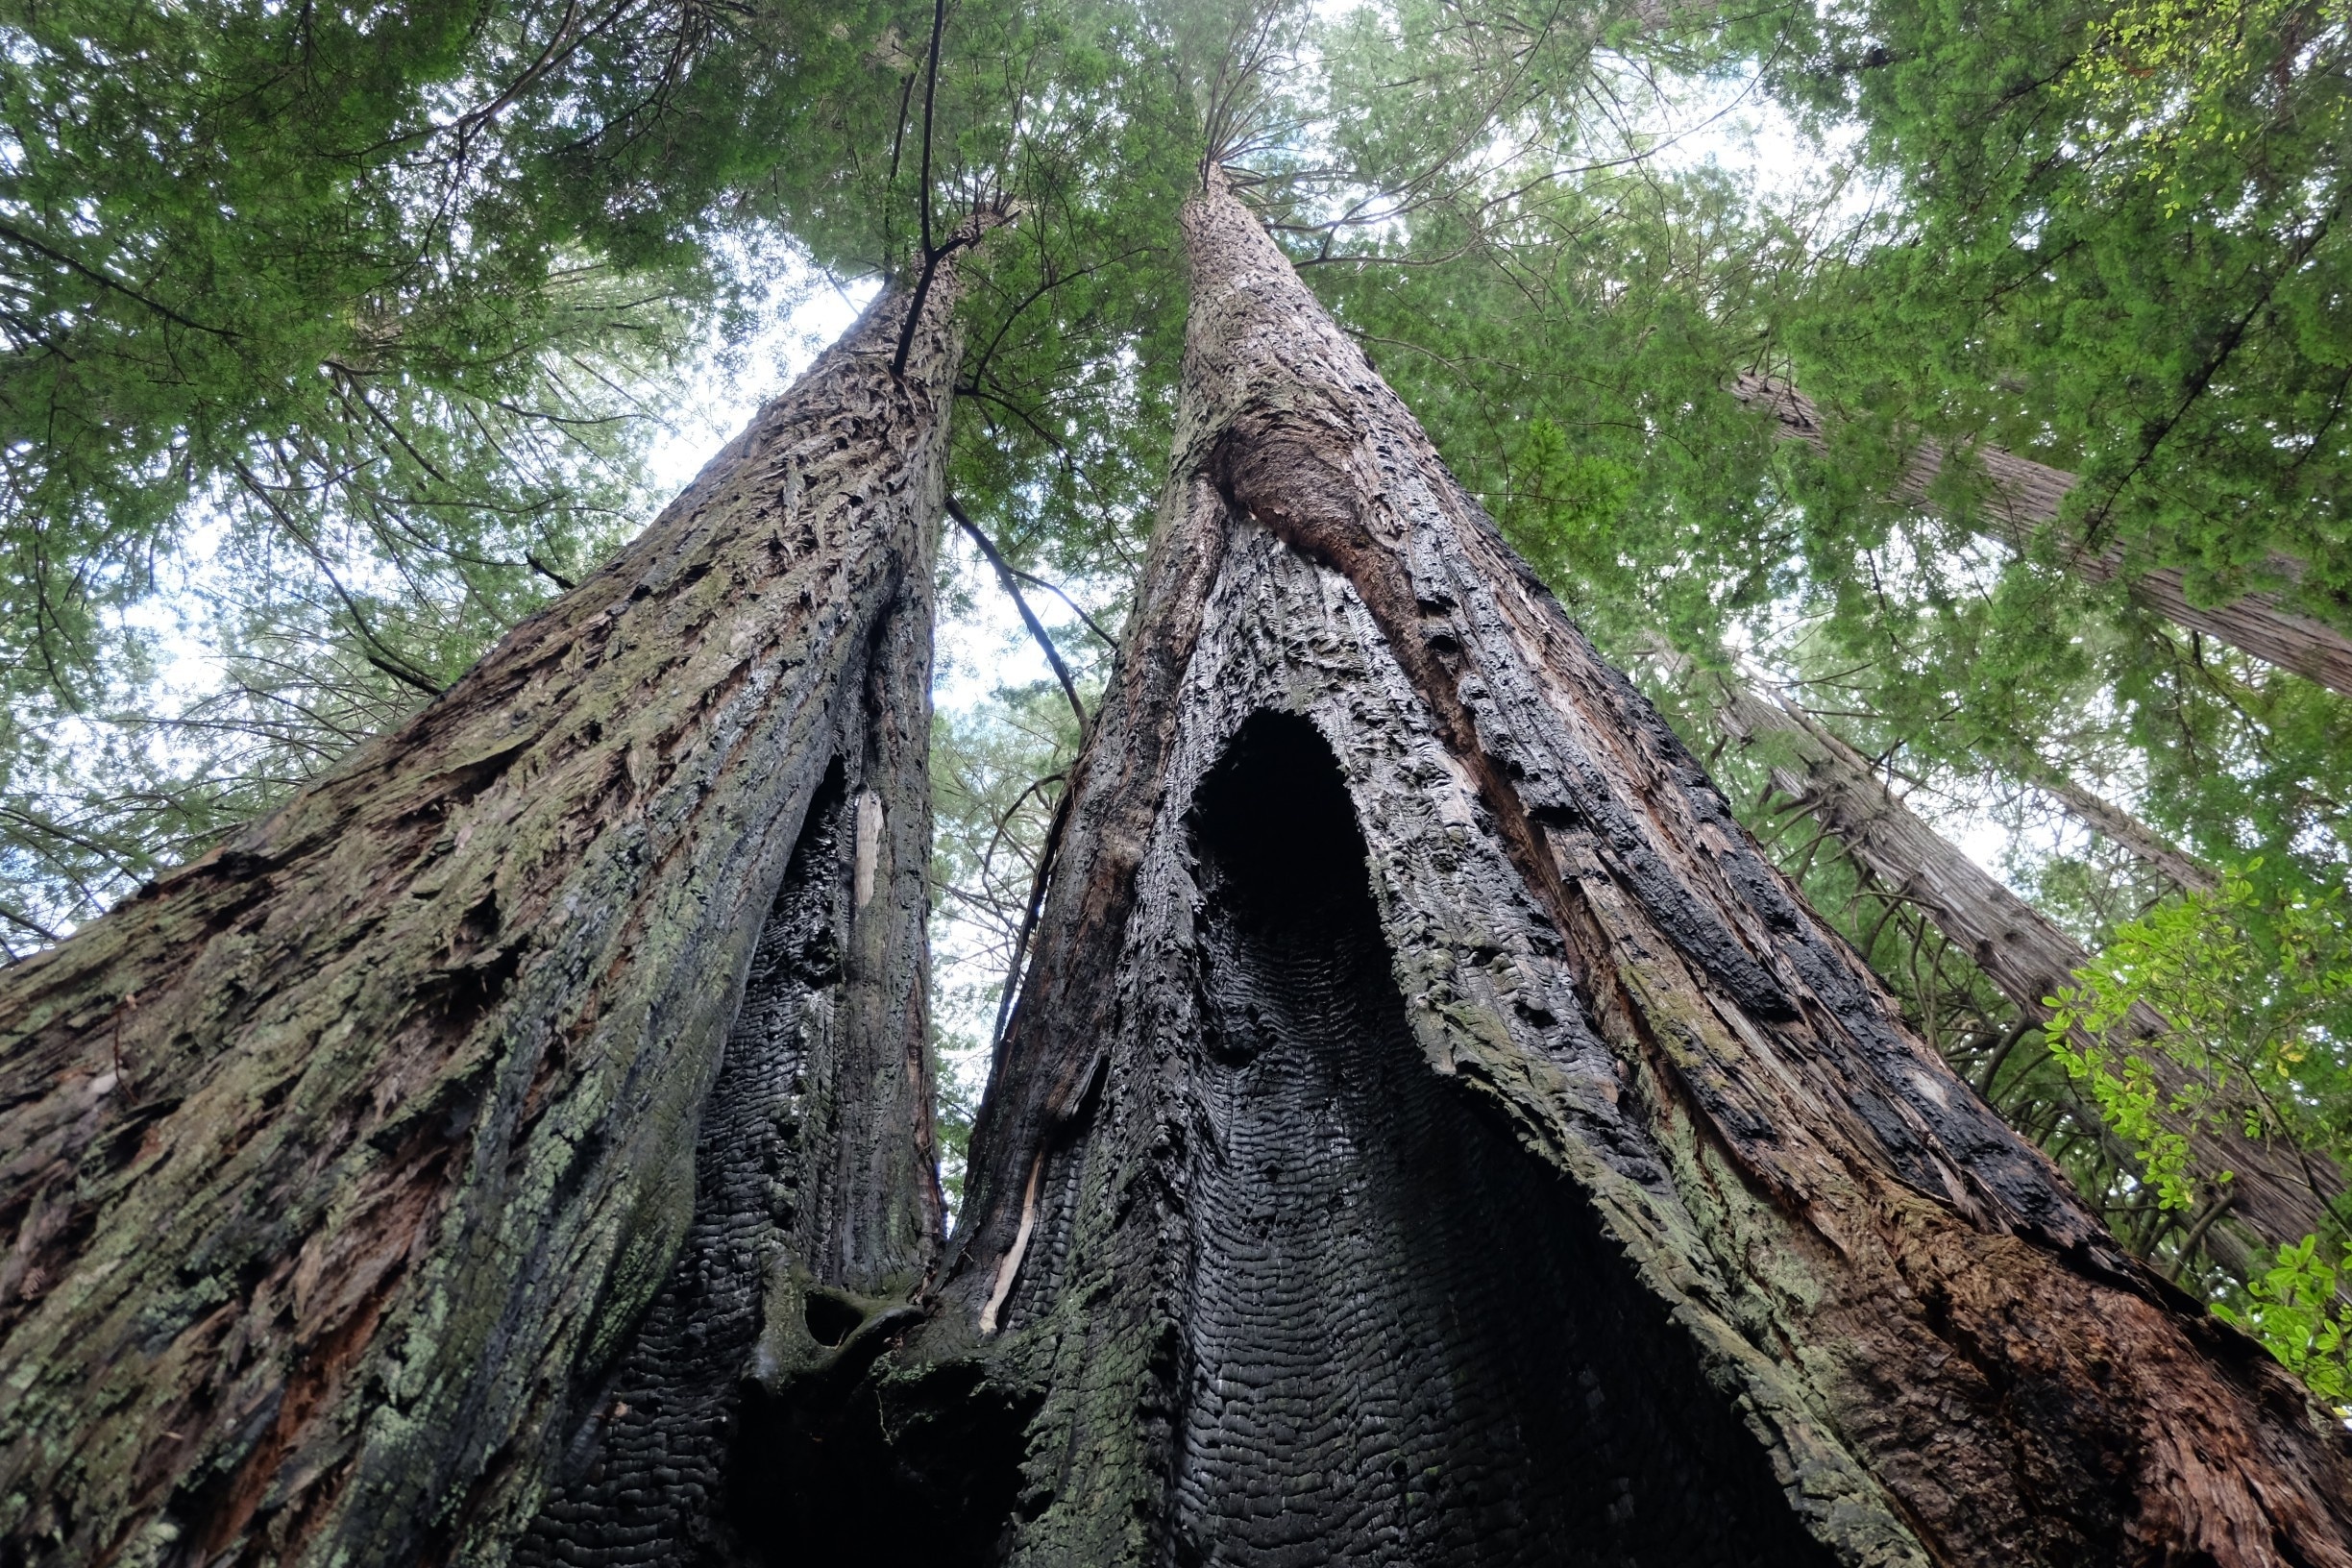 Evidence of fires past in this stand of redwoods in Jedidiah Smith State Park.